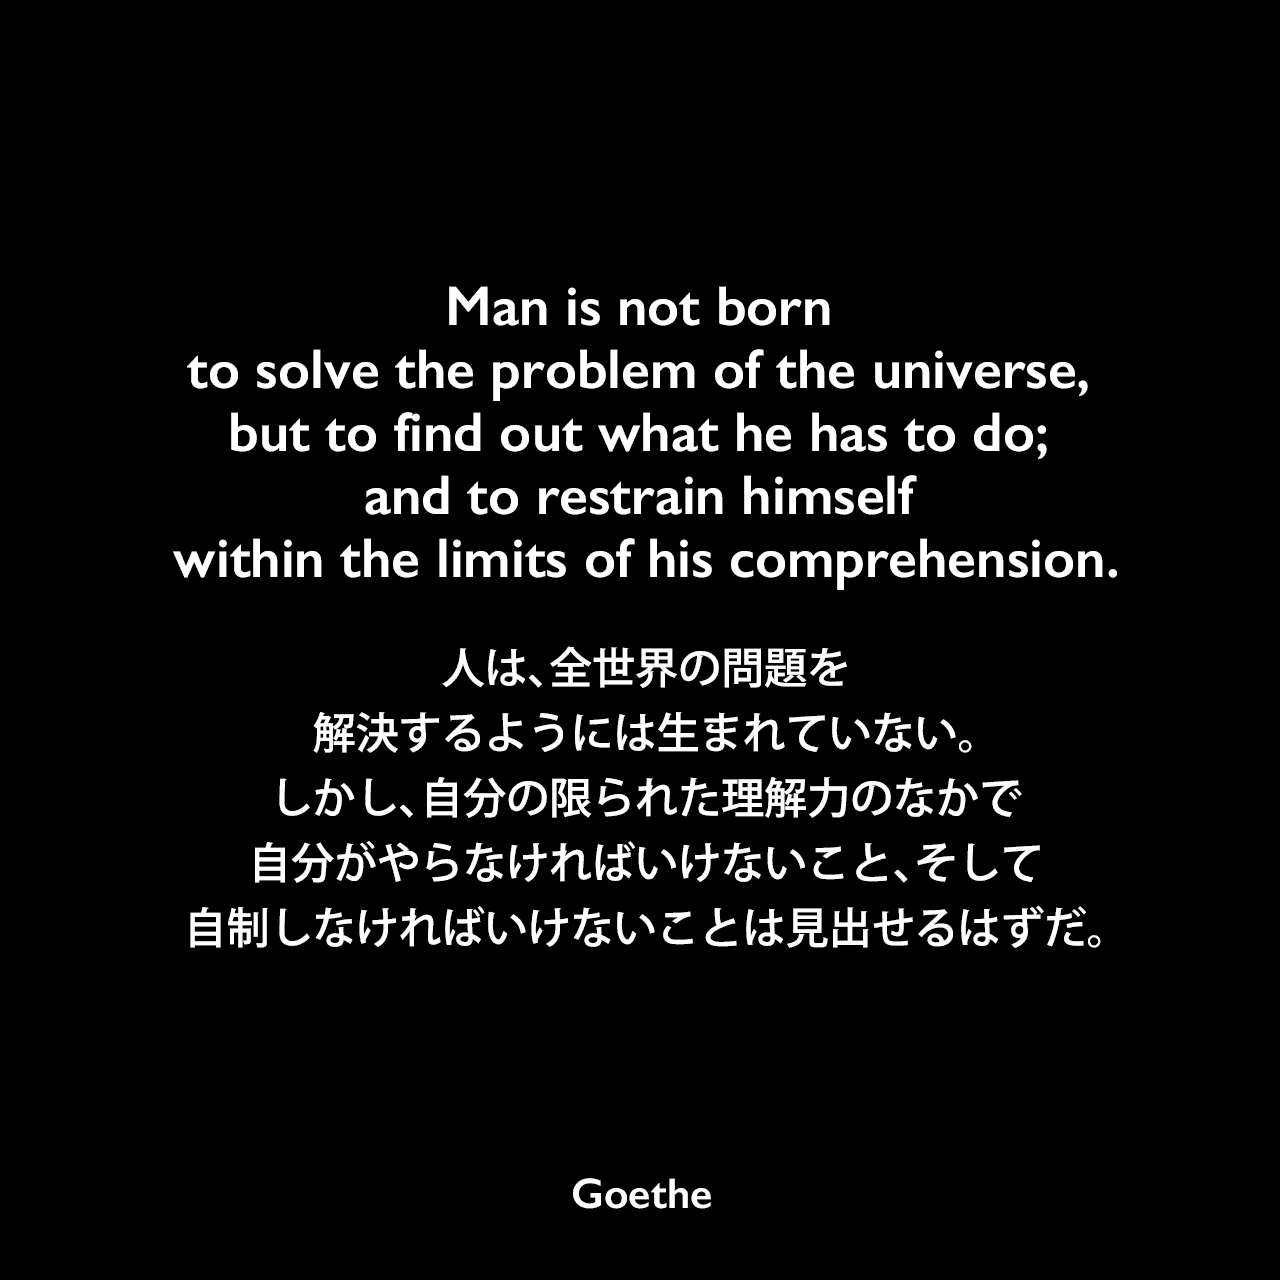 Man is not born to solve the problem of the universe, but to find out what he has to do; and to restrain himself within the limits of his comprehension.人は、全世界の問題を解決するようには生まれていない。しかし、自分の限られた理解力のなかで、自分がやらなければいけないこと、そして、自制しなければいけないことは見出せるはずだ。Johann Wolfgang von Goethe